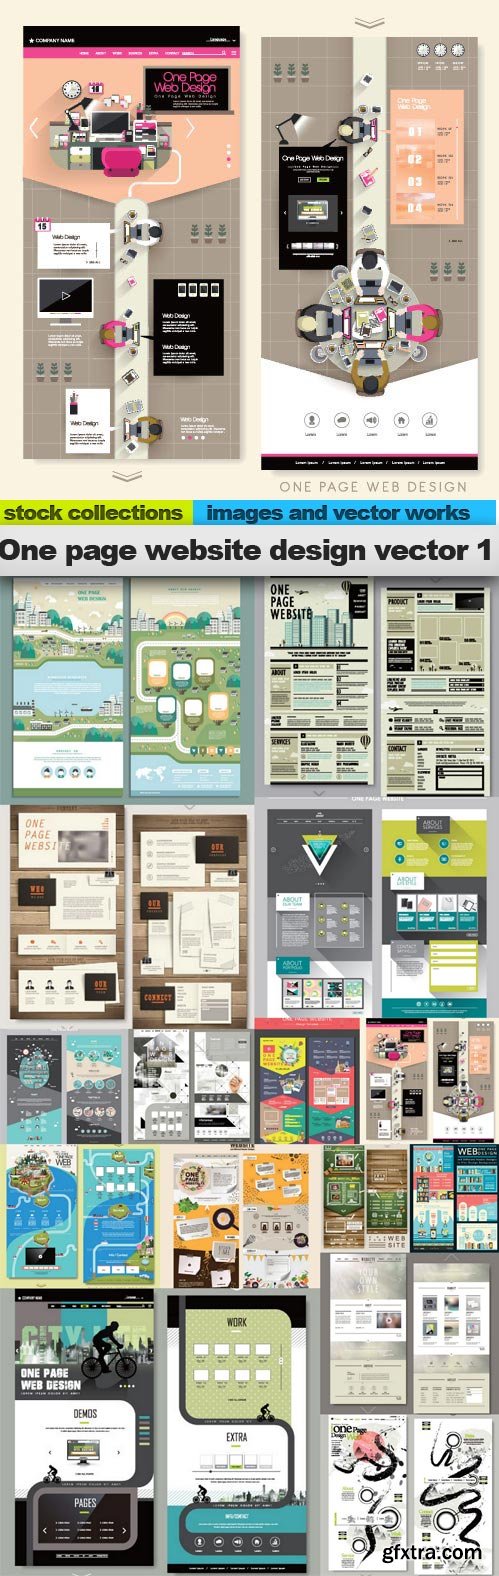 One page website design vector 1, 15 x EPS